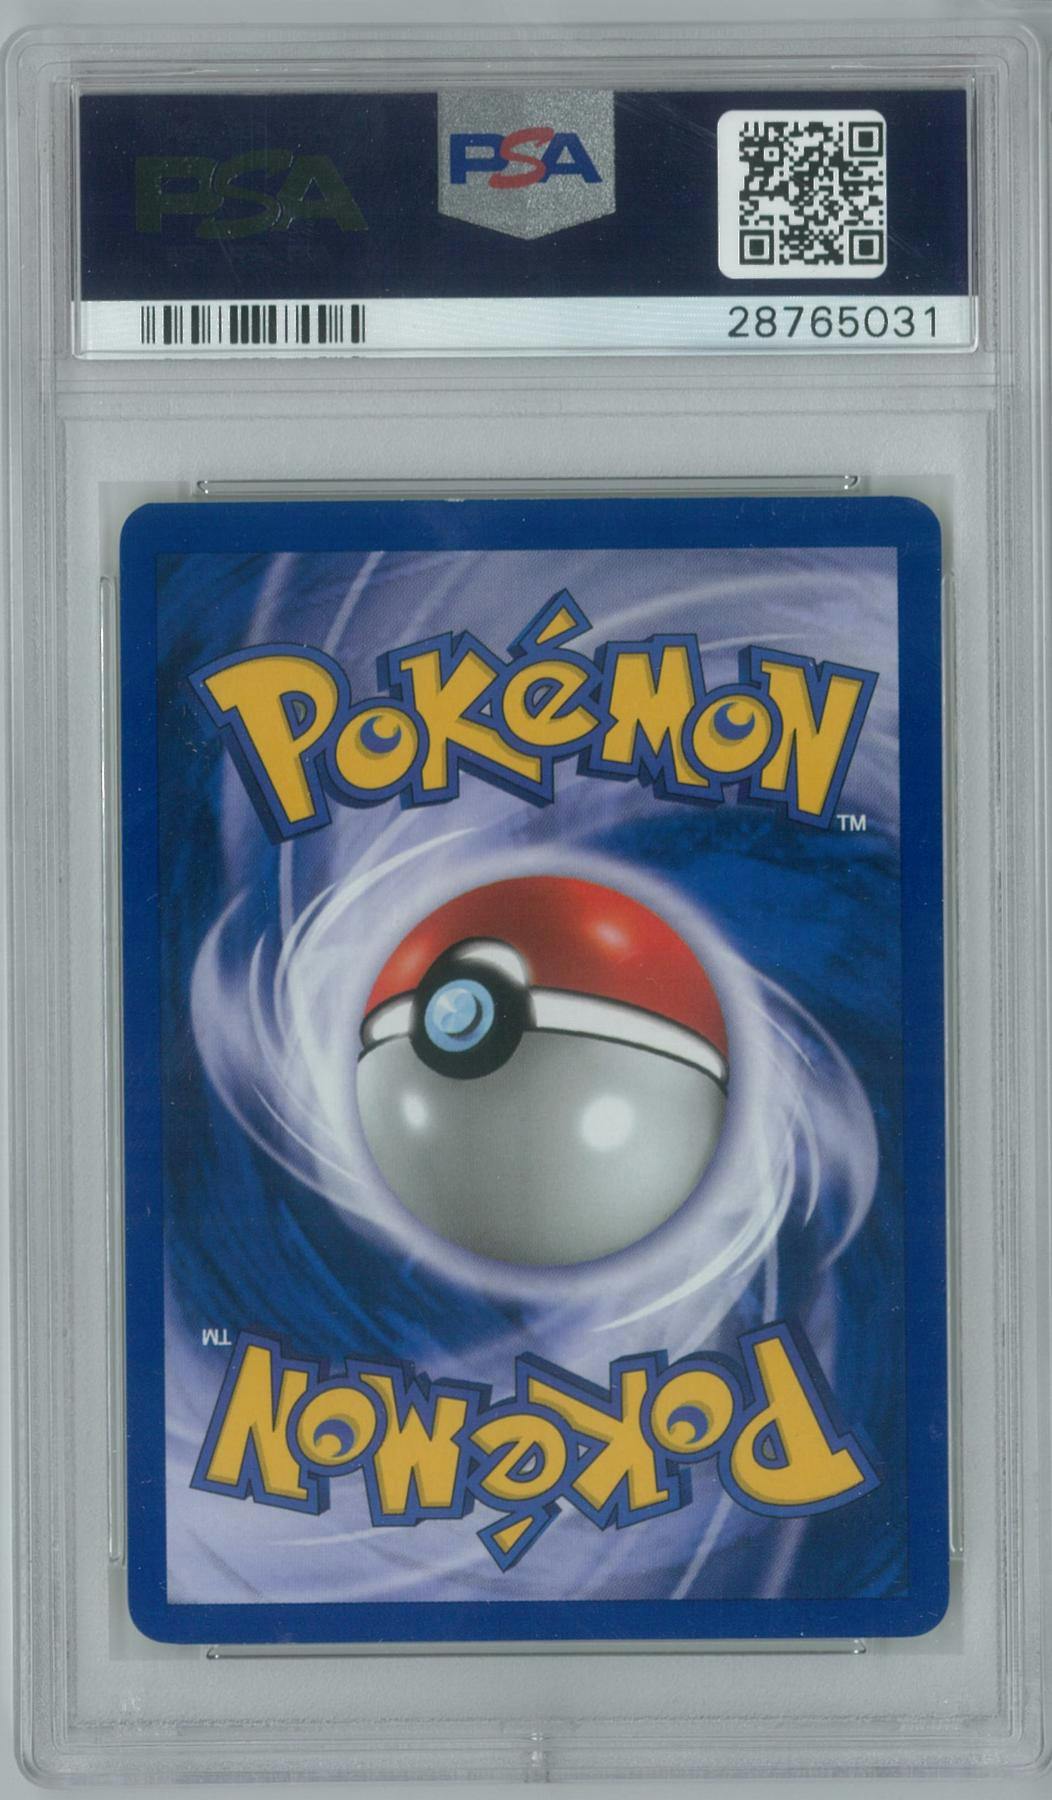 1st edition pokemon cards price guide